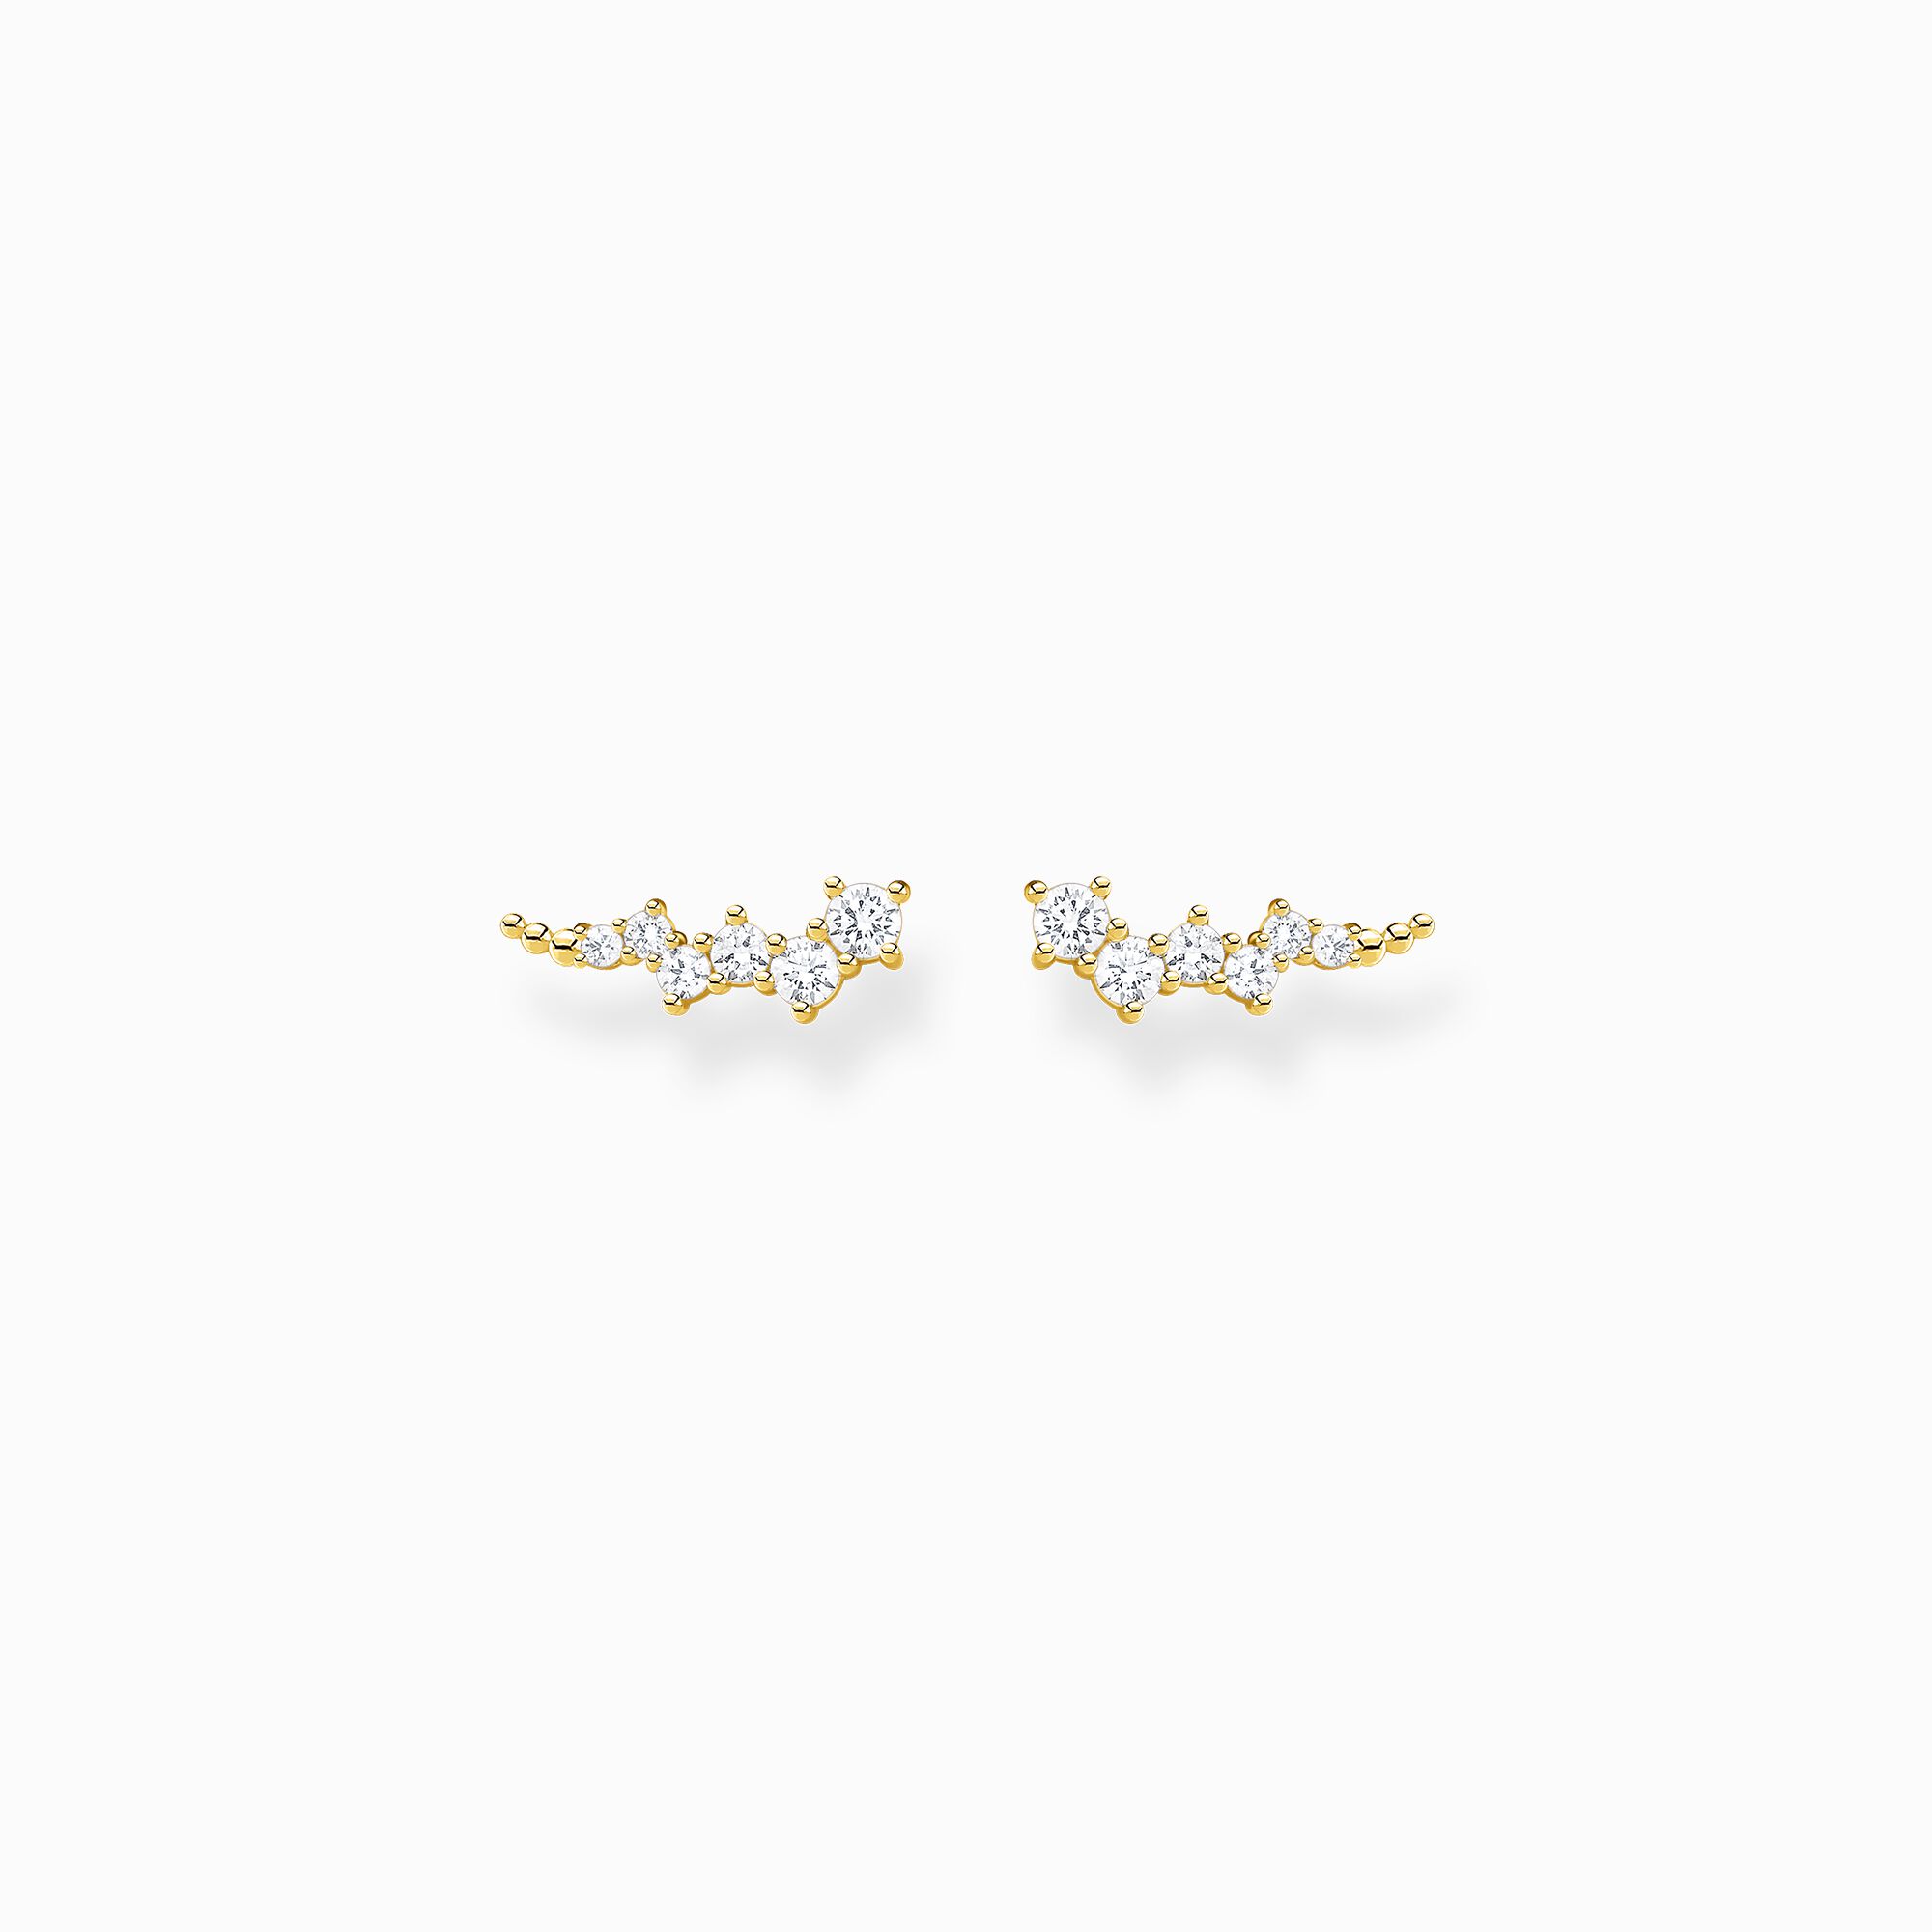 Ear climber white stones gold from the Charming Collection collection in the THOMAS SABO online store